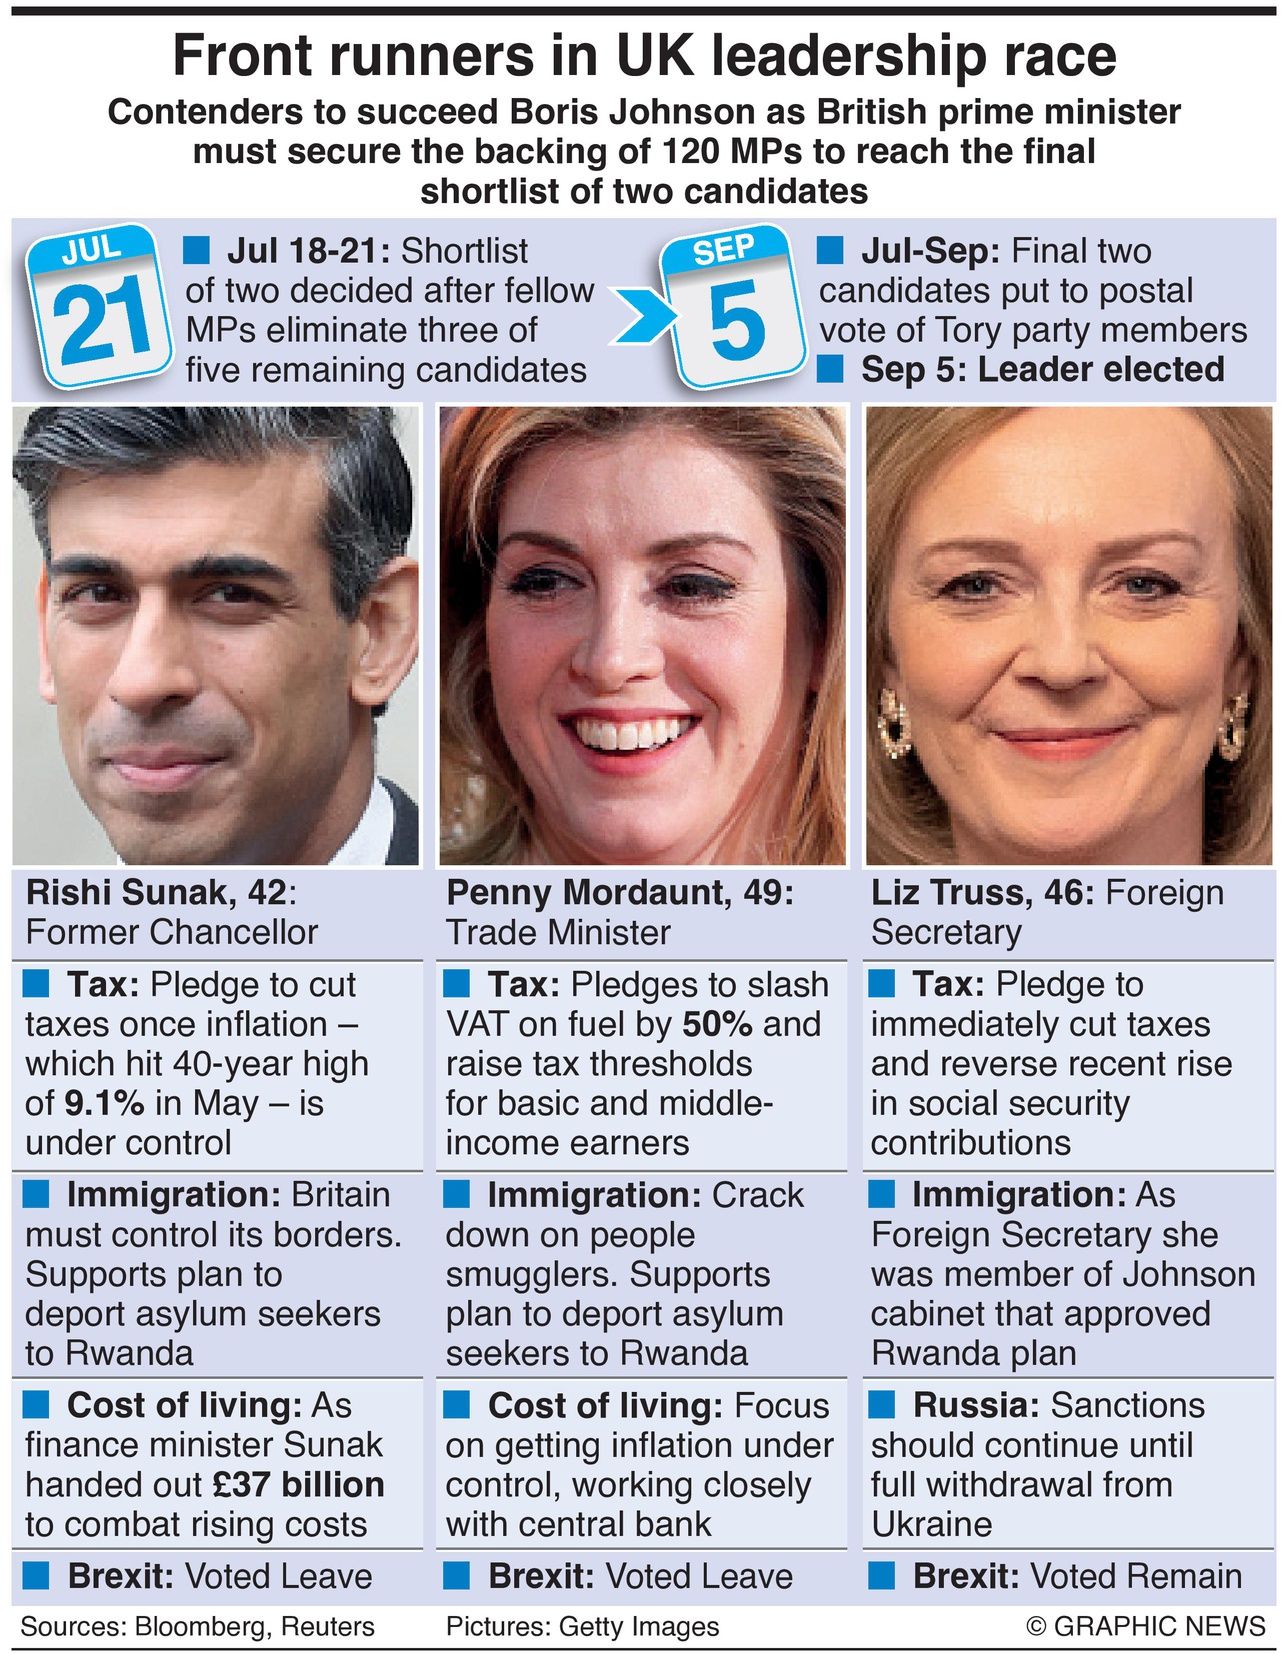 Infographic showing Britains Conservative Party candidates Rishi Sunak, Penny Mordaunt and Liz Truss